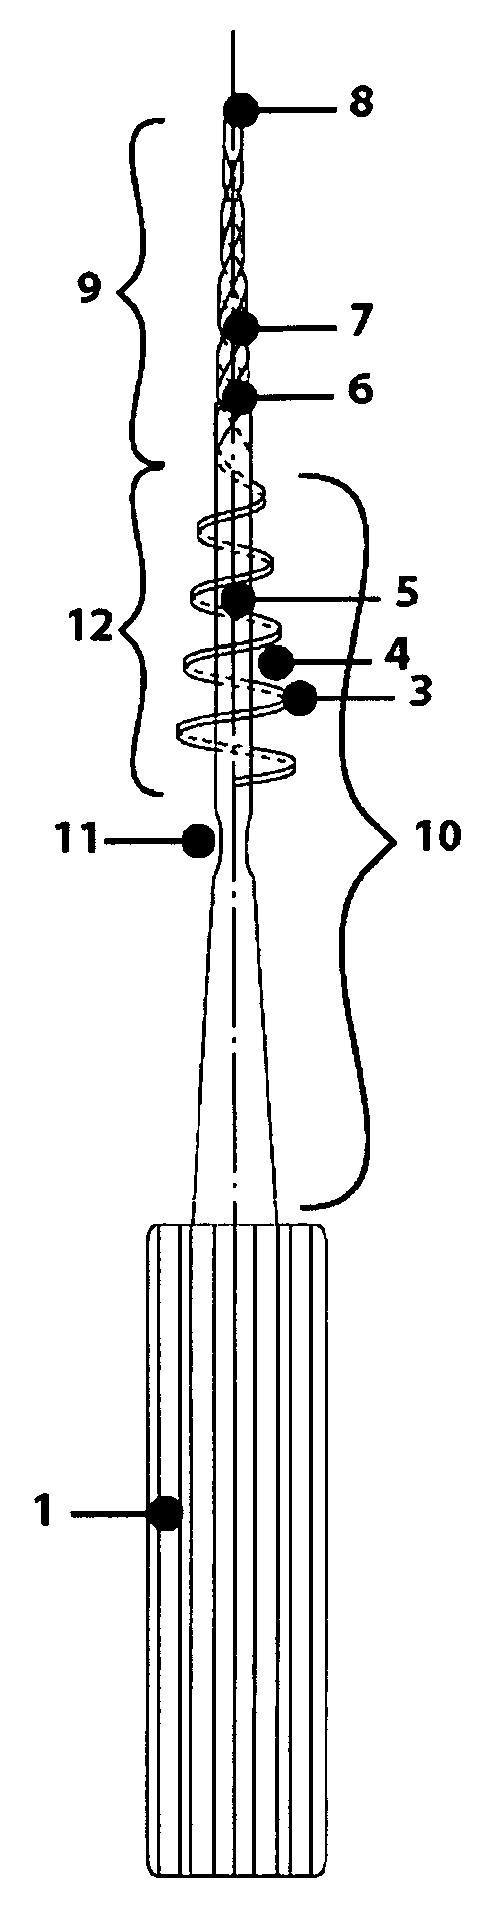 Inter dental tooth cleaner and delivery device